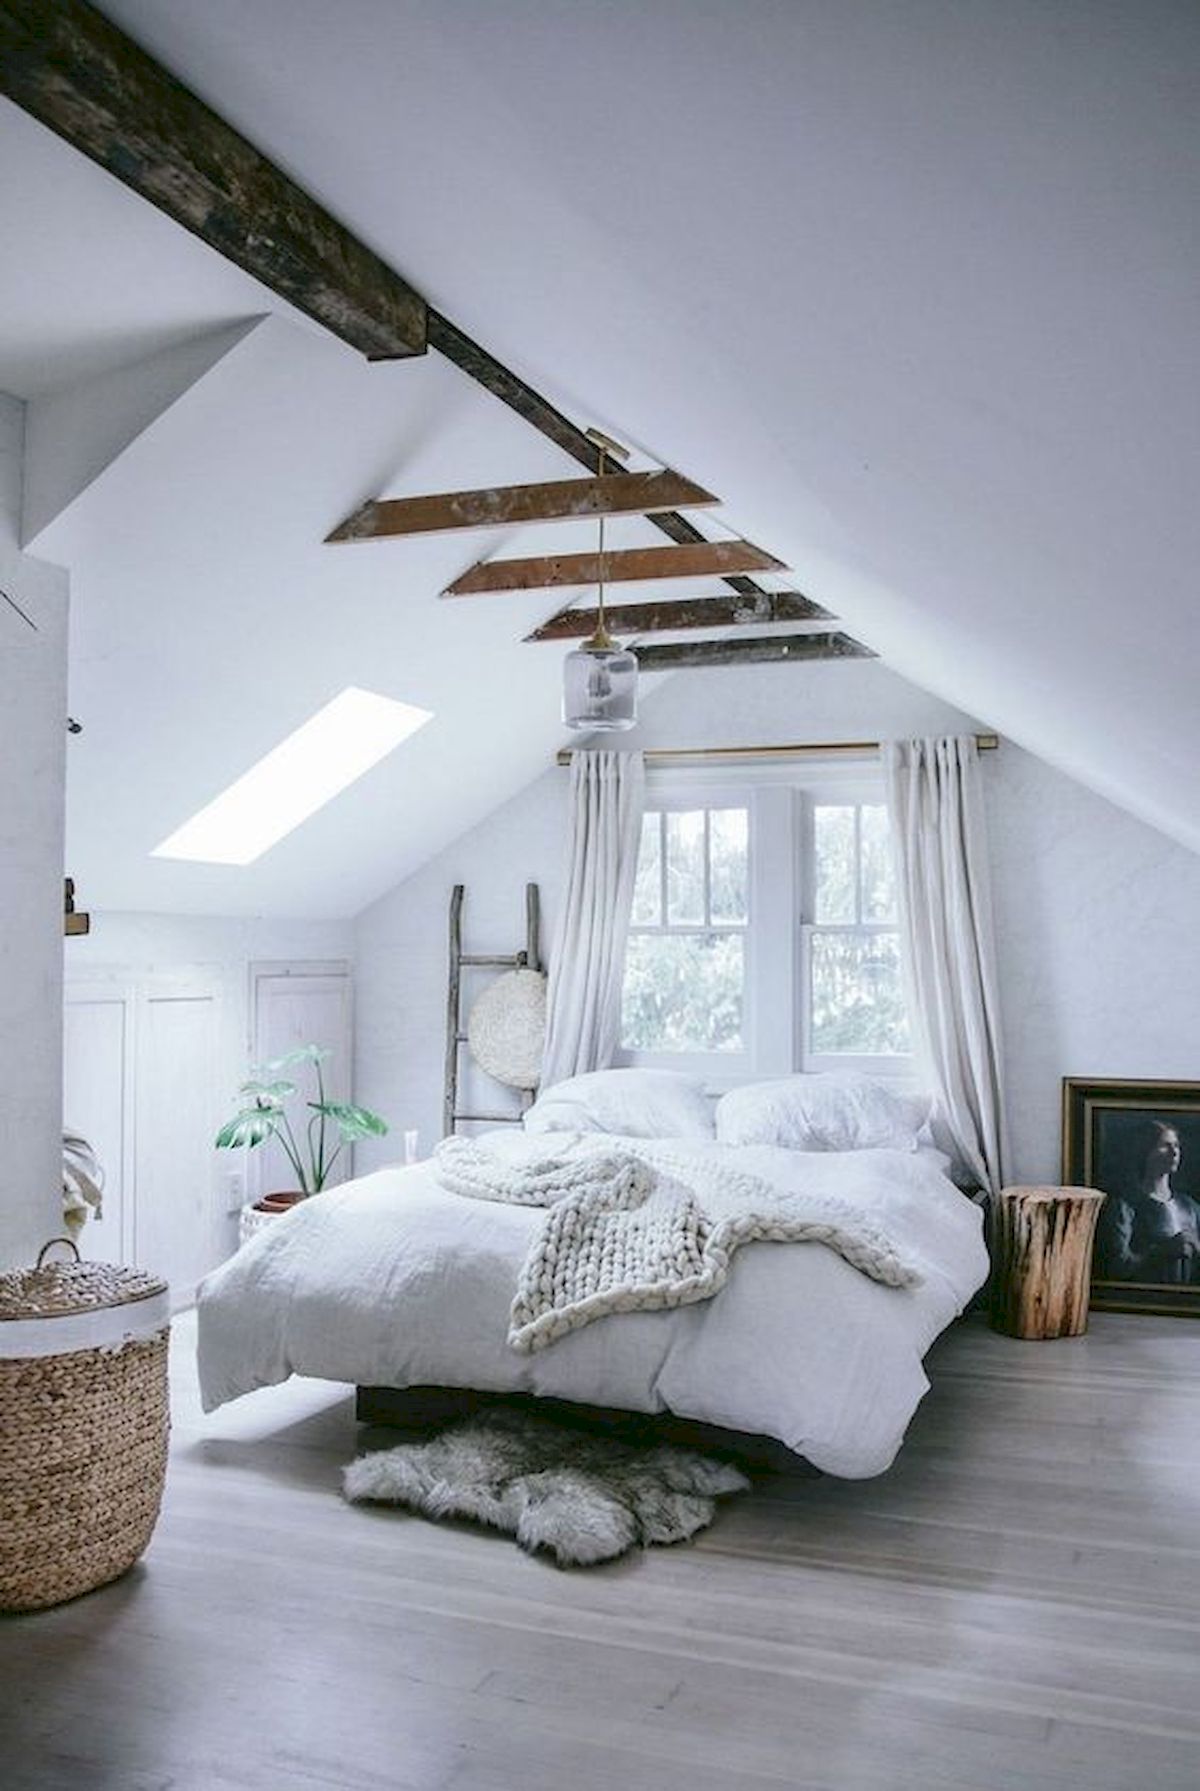 40 Awesome Attic Bedroom Design and Decorating Ideas (37)